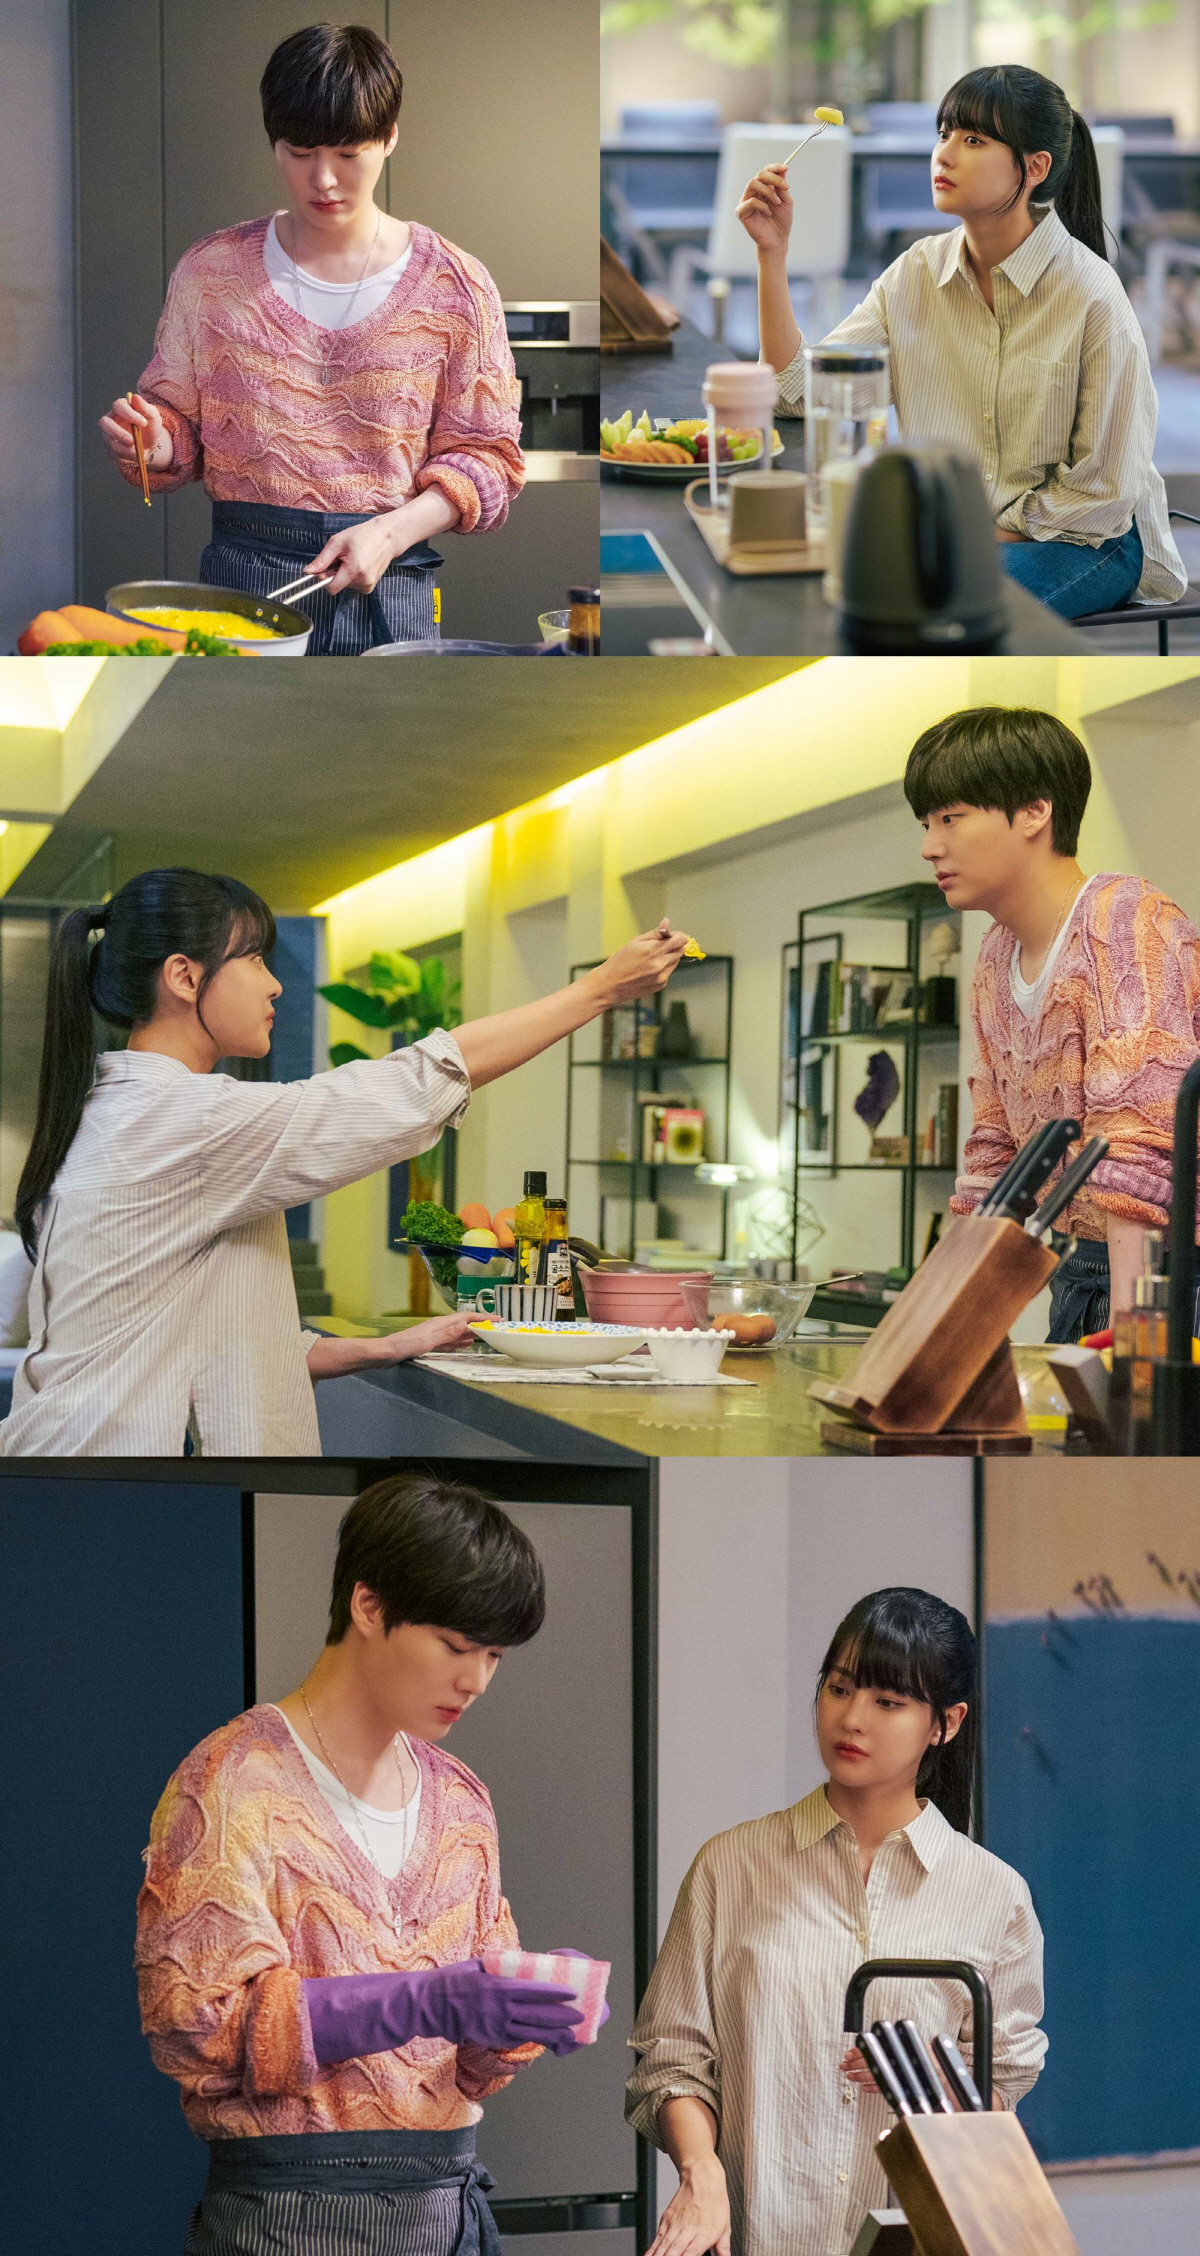 Oh Yeon-seo and Ahn Jae-hyun enjoy a sweet Home Date.In the 13th and 14th MBC tree mini series The Weak Humans (directed by Oh Jin-seok/playplayplay by Ahn Shin-yu/Produced Aesto), which will be broadcast tonight (18th), Oh Yeon-seo (played by Joo Seo-yeon) and Ahn Jae-hyun (played by Lee Kang-woo) will increase their heart rate with a more upgraded pink love.In the last broadcast, a red light was on the love between Lee Kang-woo (Ahn Jae-hyun) and Joo Seo-yeon (Oh Yeon-seo).Ju Seo-yeon found out that Lee Kang-woo and Park Hyun-soo (Heo Jung-min) were not lovers, and they were in a crisis of separation.In order to win the heart of Ju Seo-yeon, Lee Min-hyuk is expected to join the turbulent motive of the triangle, so the unpredictable changes of emotions and the unexpected actions of the three men and women are expected to unfold every moment.In the meantime, Lee Kang-woo, who has been bad for Ju Seo-yeon, is caught cooking handmade for her.Especially, the two people are not only in the midst of the bitterness between them, but they are also enjoying a sweet atmosphere, adding to the expectation of broadcasting today.In addition, Lee Kang-woos eyes looking at Ju Seo-yeon are making the hearts of those who feel the subtle feelings of complexness.Moreover, at the end of the last broadcast, Lee Kang-woo learned that his cousin, Lee Min-hyuk, likes Ju Seo-yeon, so how he will use Ju Seo-yeons heart is also considered as a point of view.The 13th and 14th episodes of the MBC tree mini series The Weeded Men which is tapping the hearts of viewers with more sad and sweet romance can be confirmed at 8:55 pm today (18th).